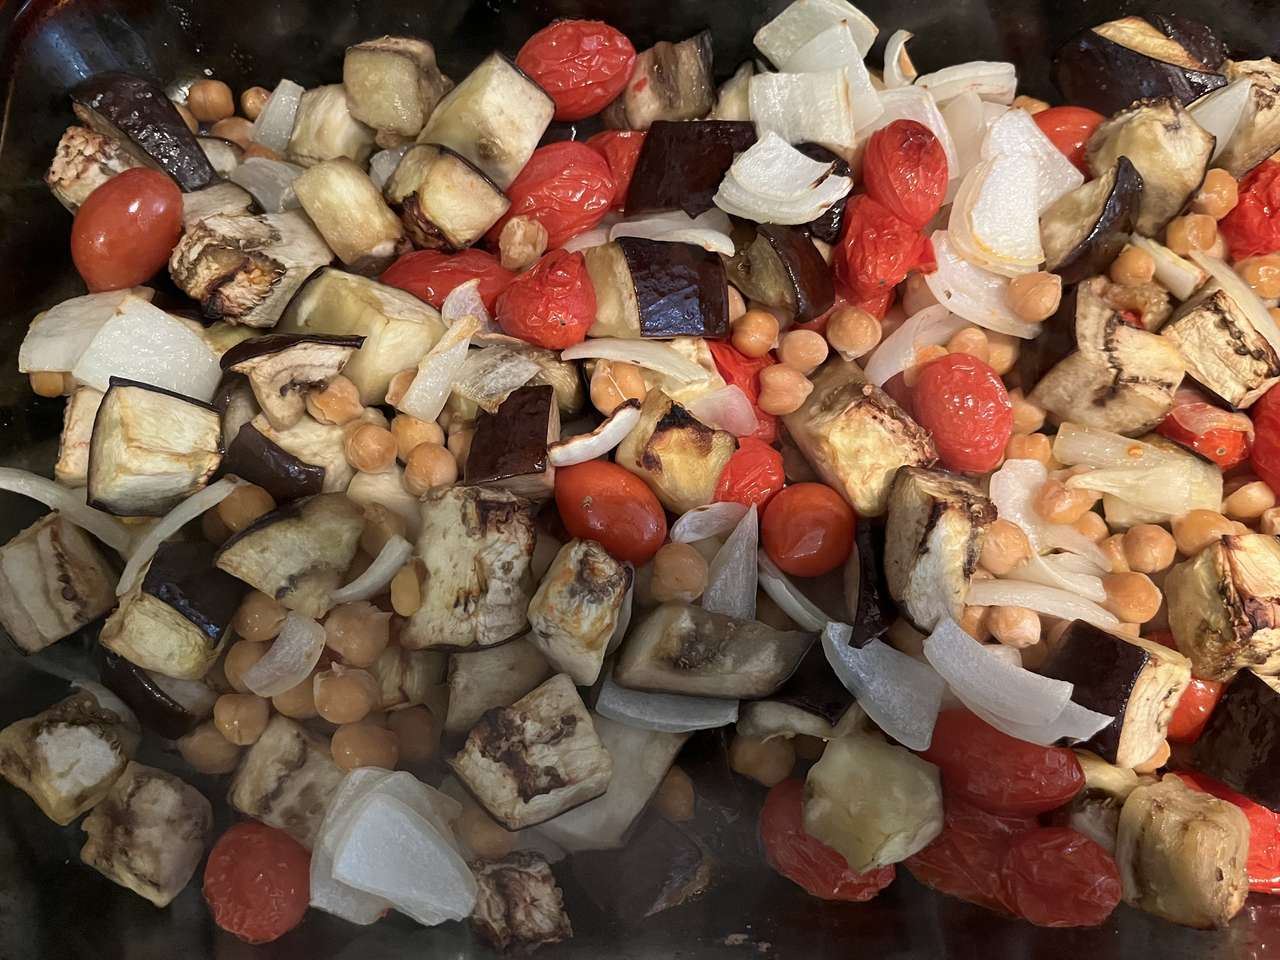 Roasted veggies and garbanzos puzzle online from photo